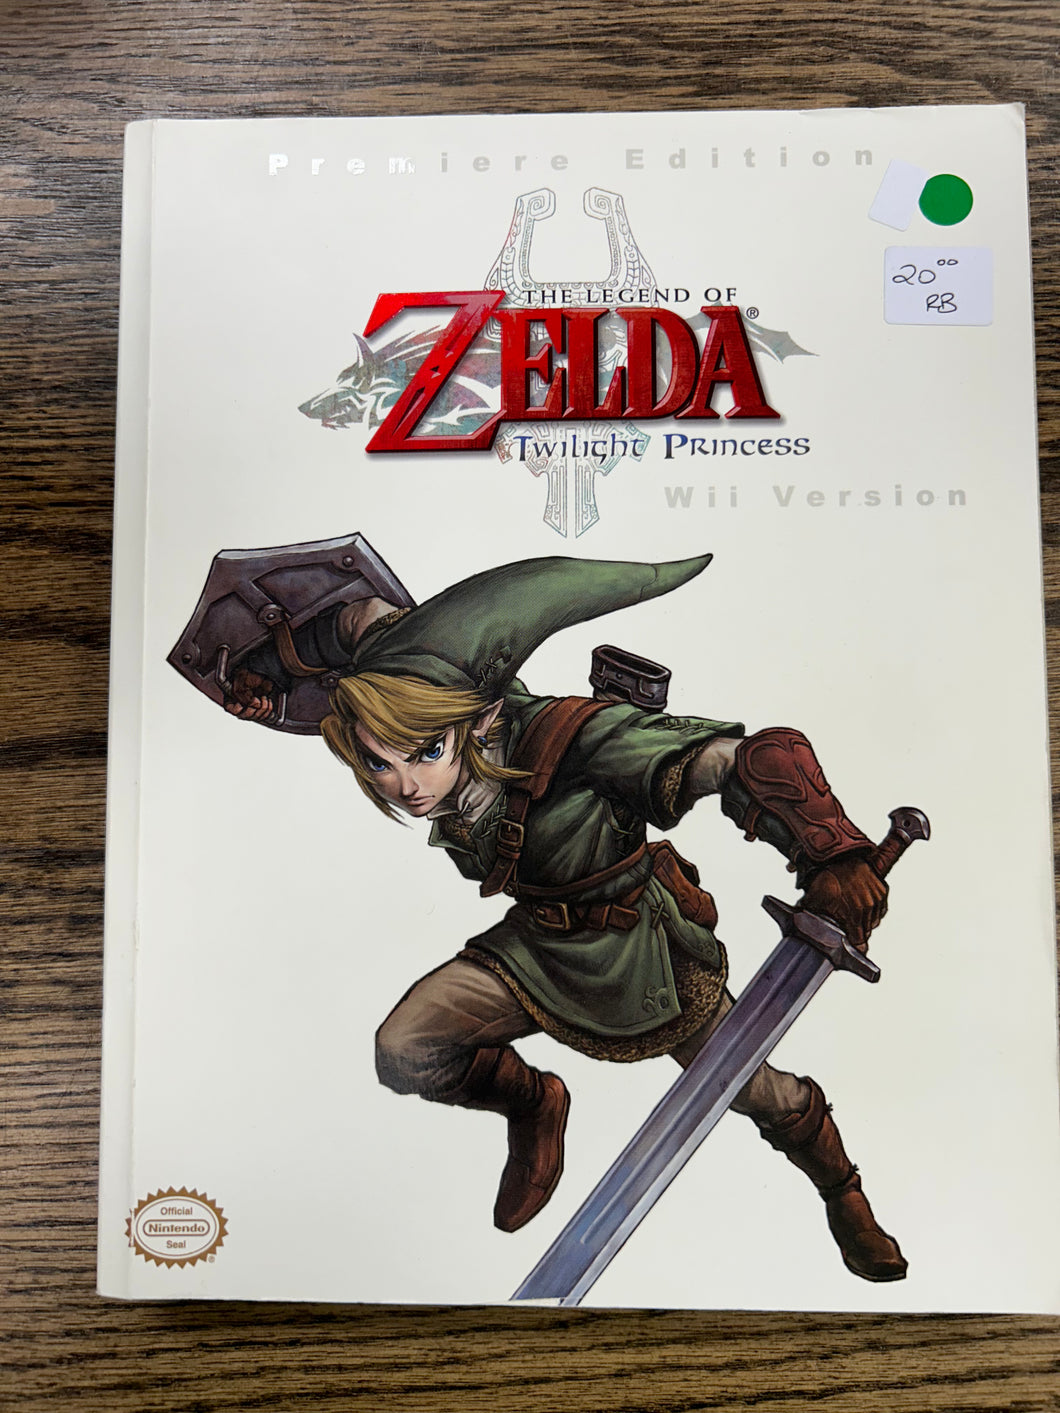 The Legend of Zelda: Twilight Princess Strategy Guide - Premiere Edition. Wii Version